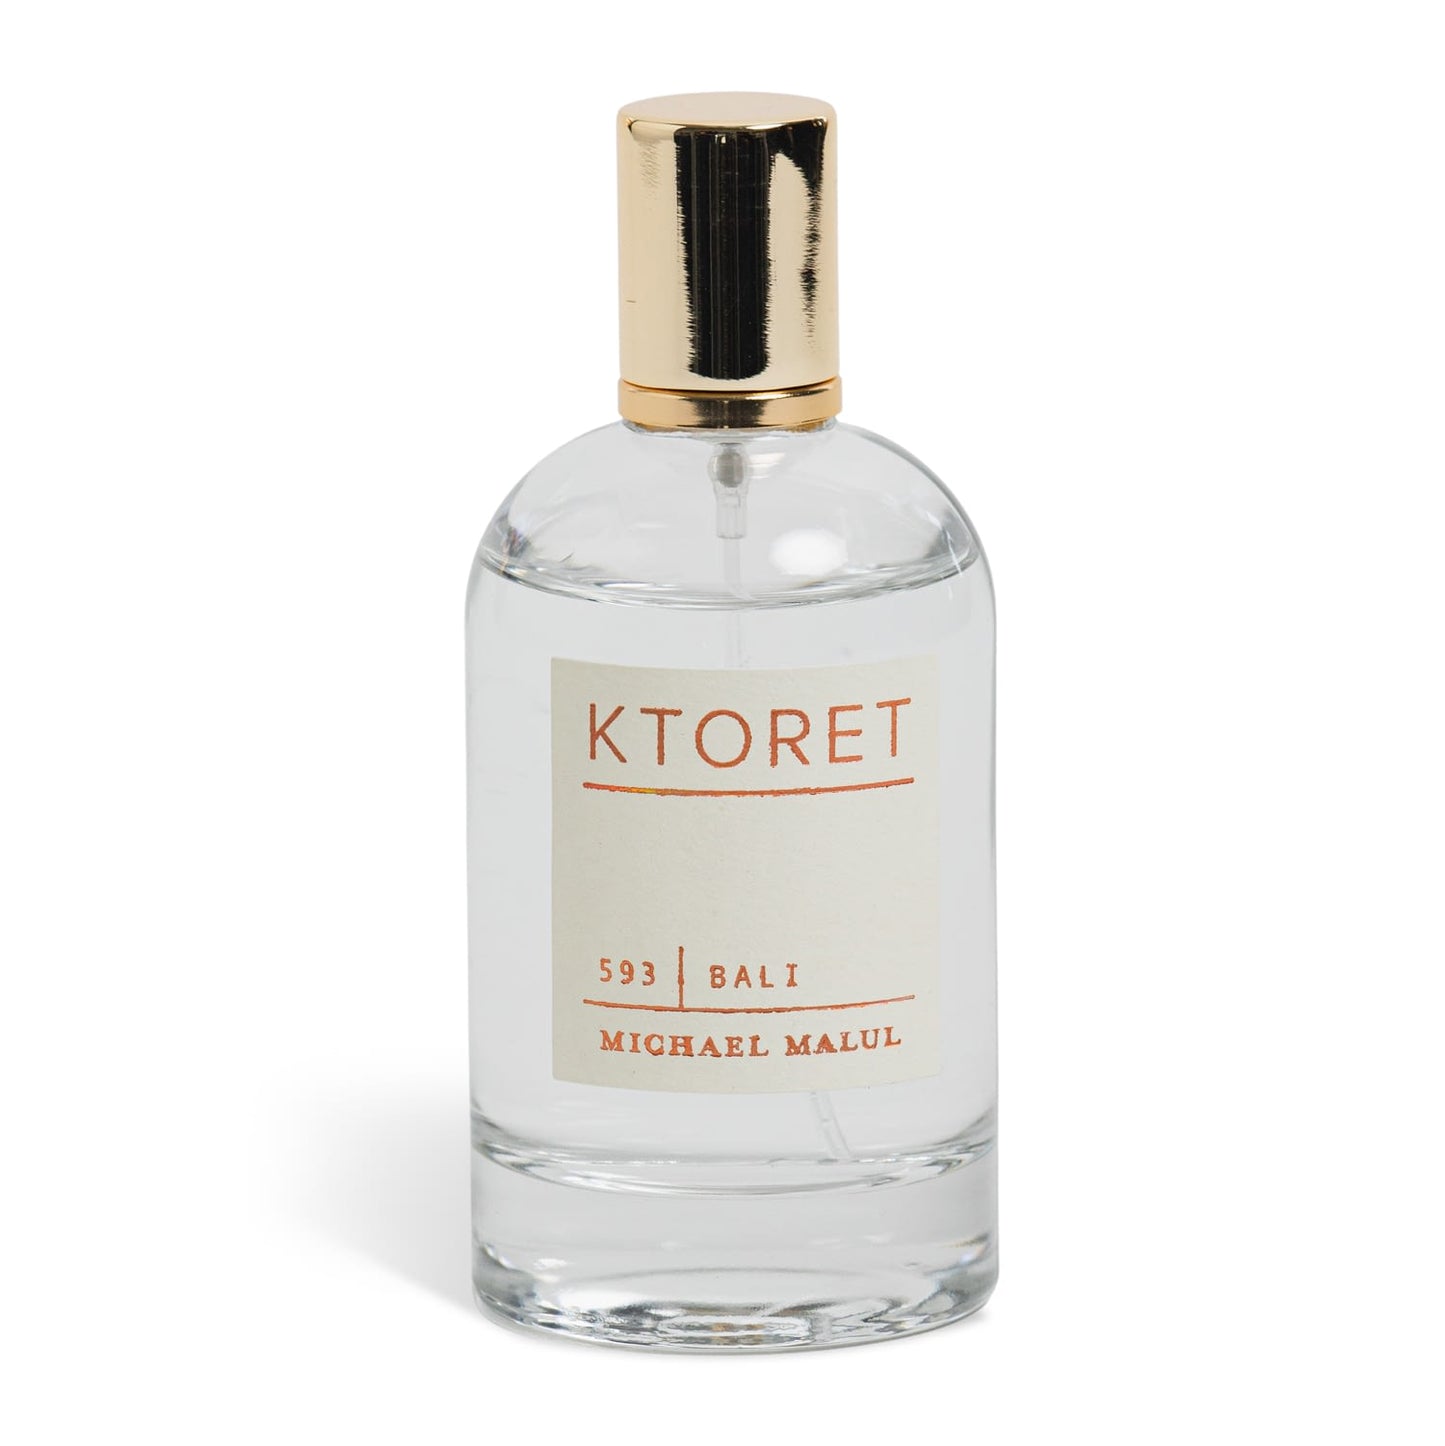 KTORET 593 Bali By Michael Malul - Scent In The City - Perfume & Cologne